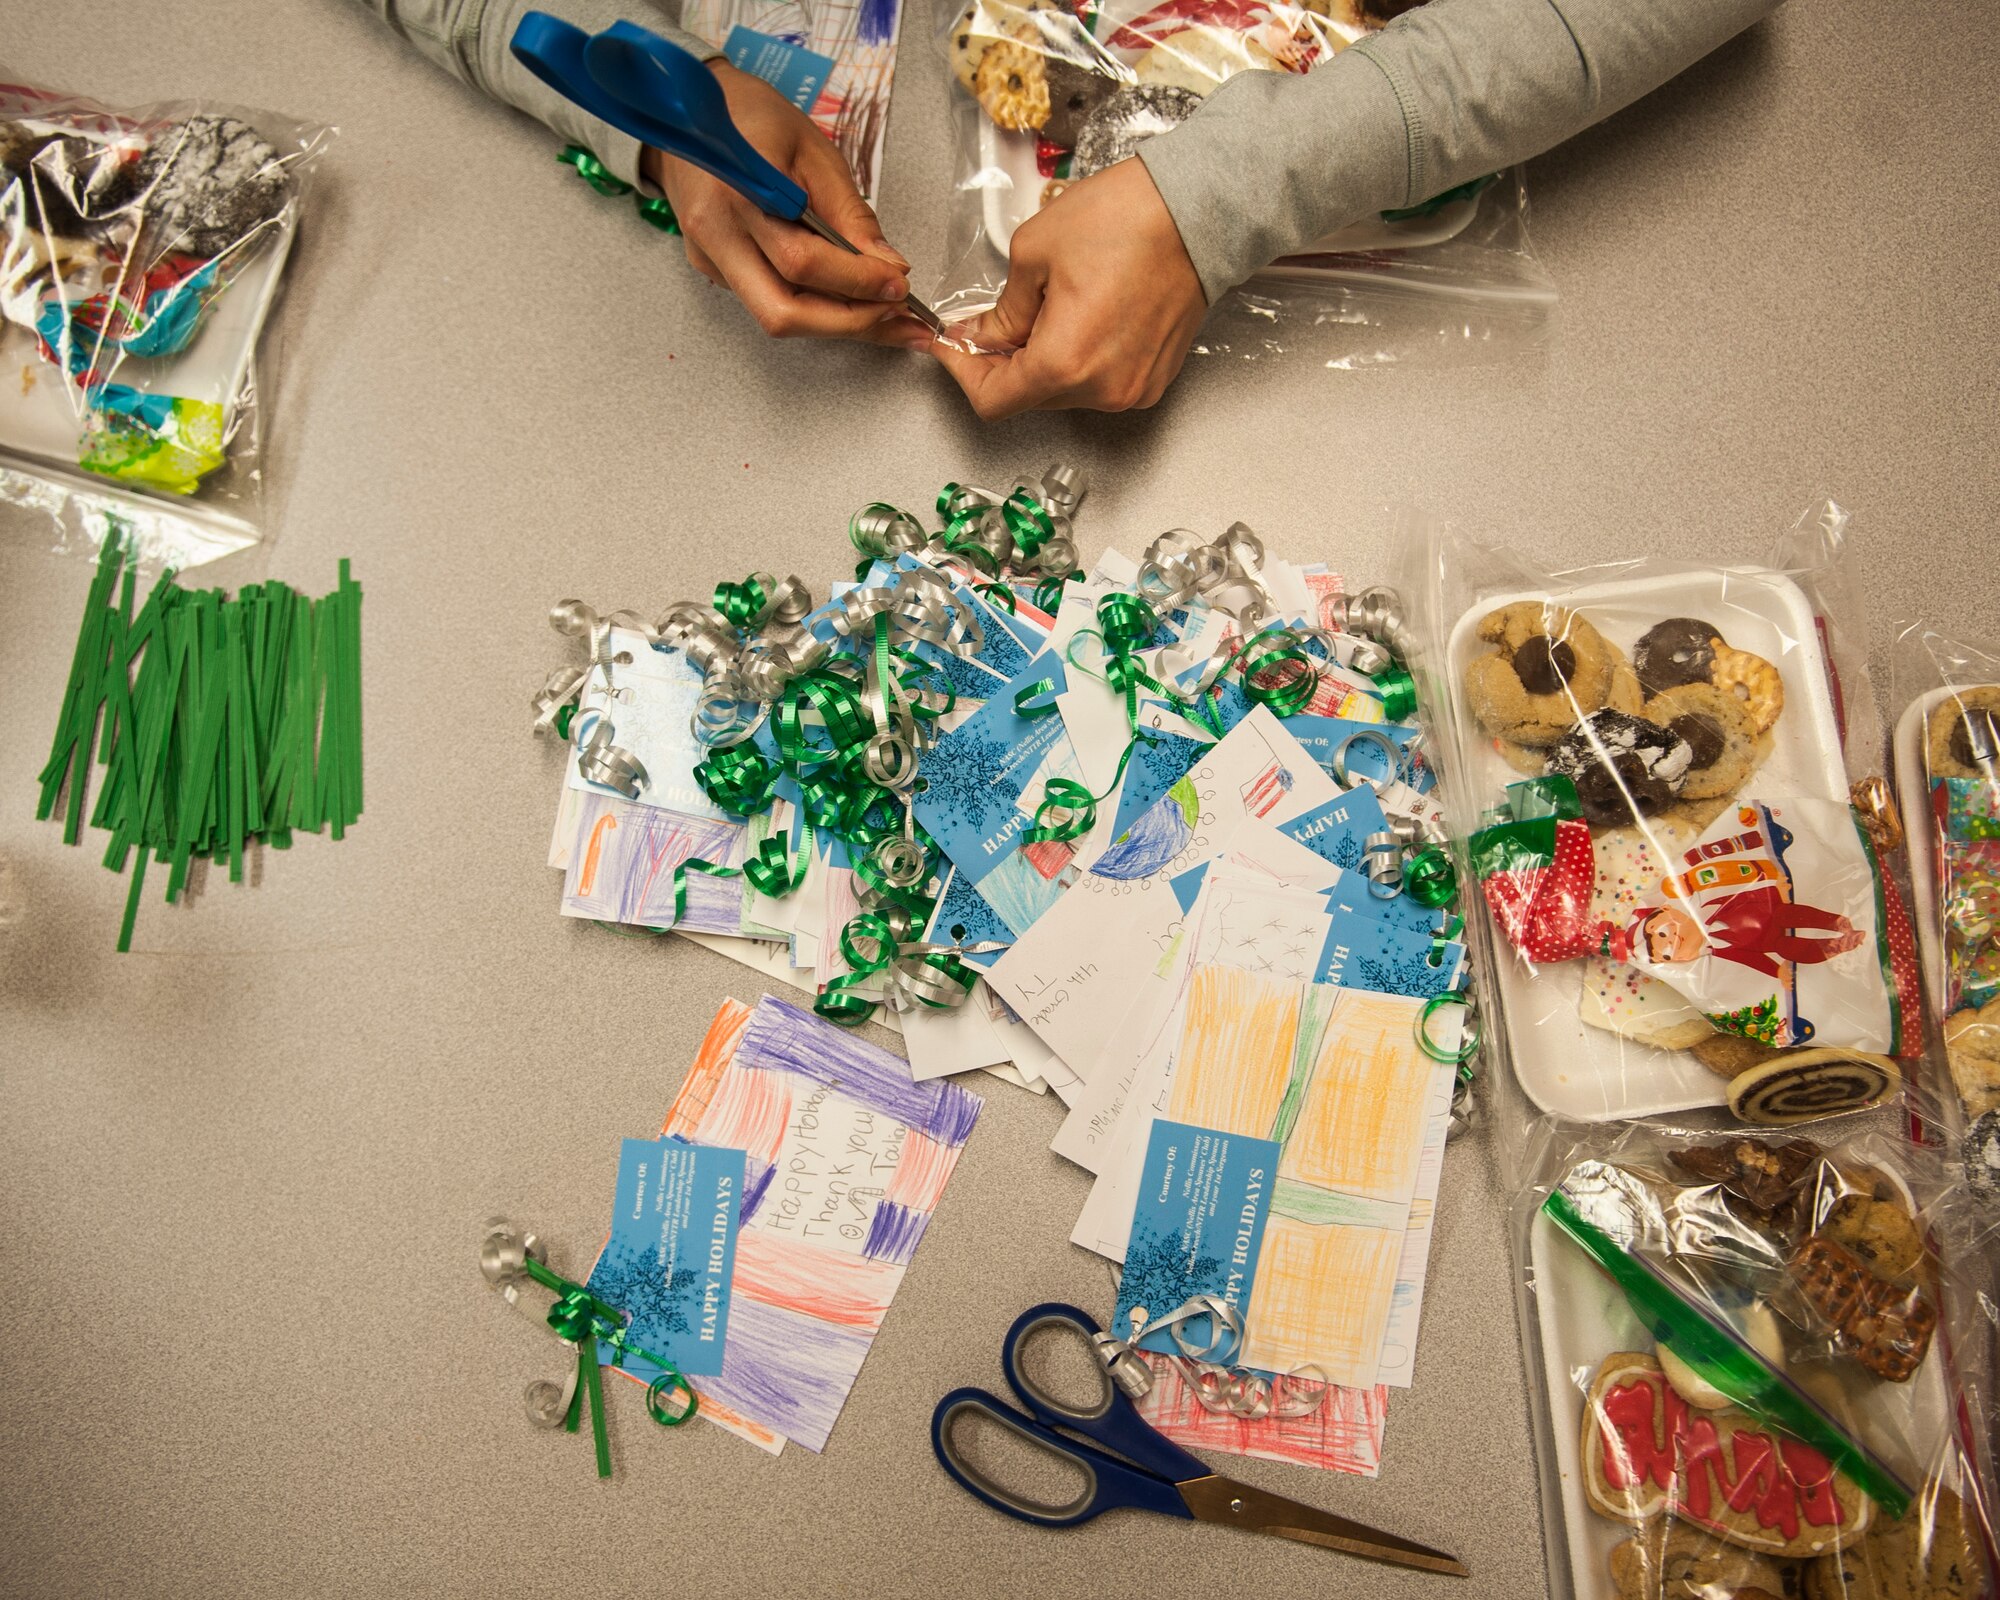 A volunteer preps a cookie package to have a ribbon and card attached to it during the Airman Cookie Drive at Nellis Air Force Base, Nev., Dec. 14, 2015. The cards were handmade by elementary school students in the local area. (U.S. Air Force photo by Staff Sgt. Siuta B. Ika)